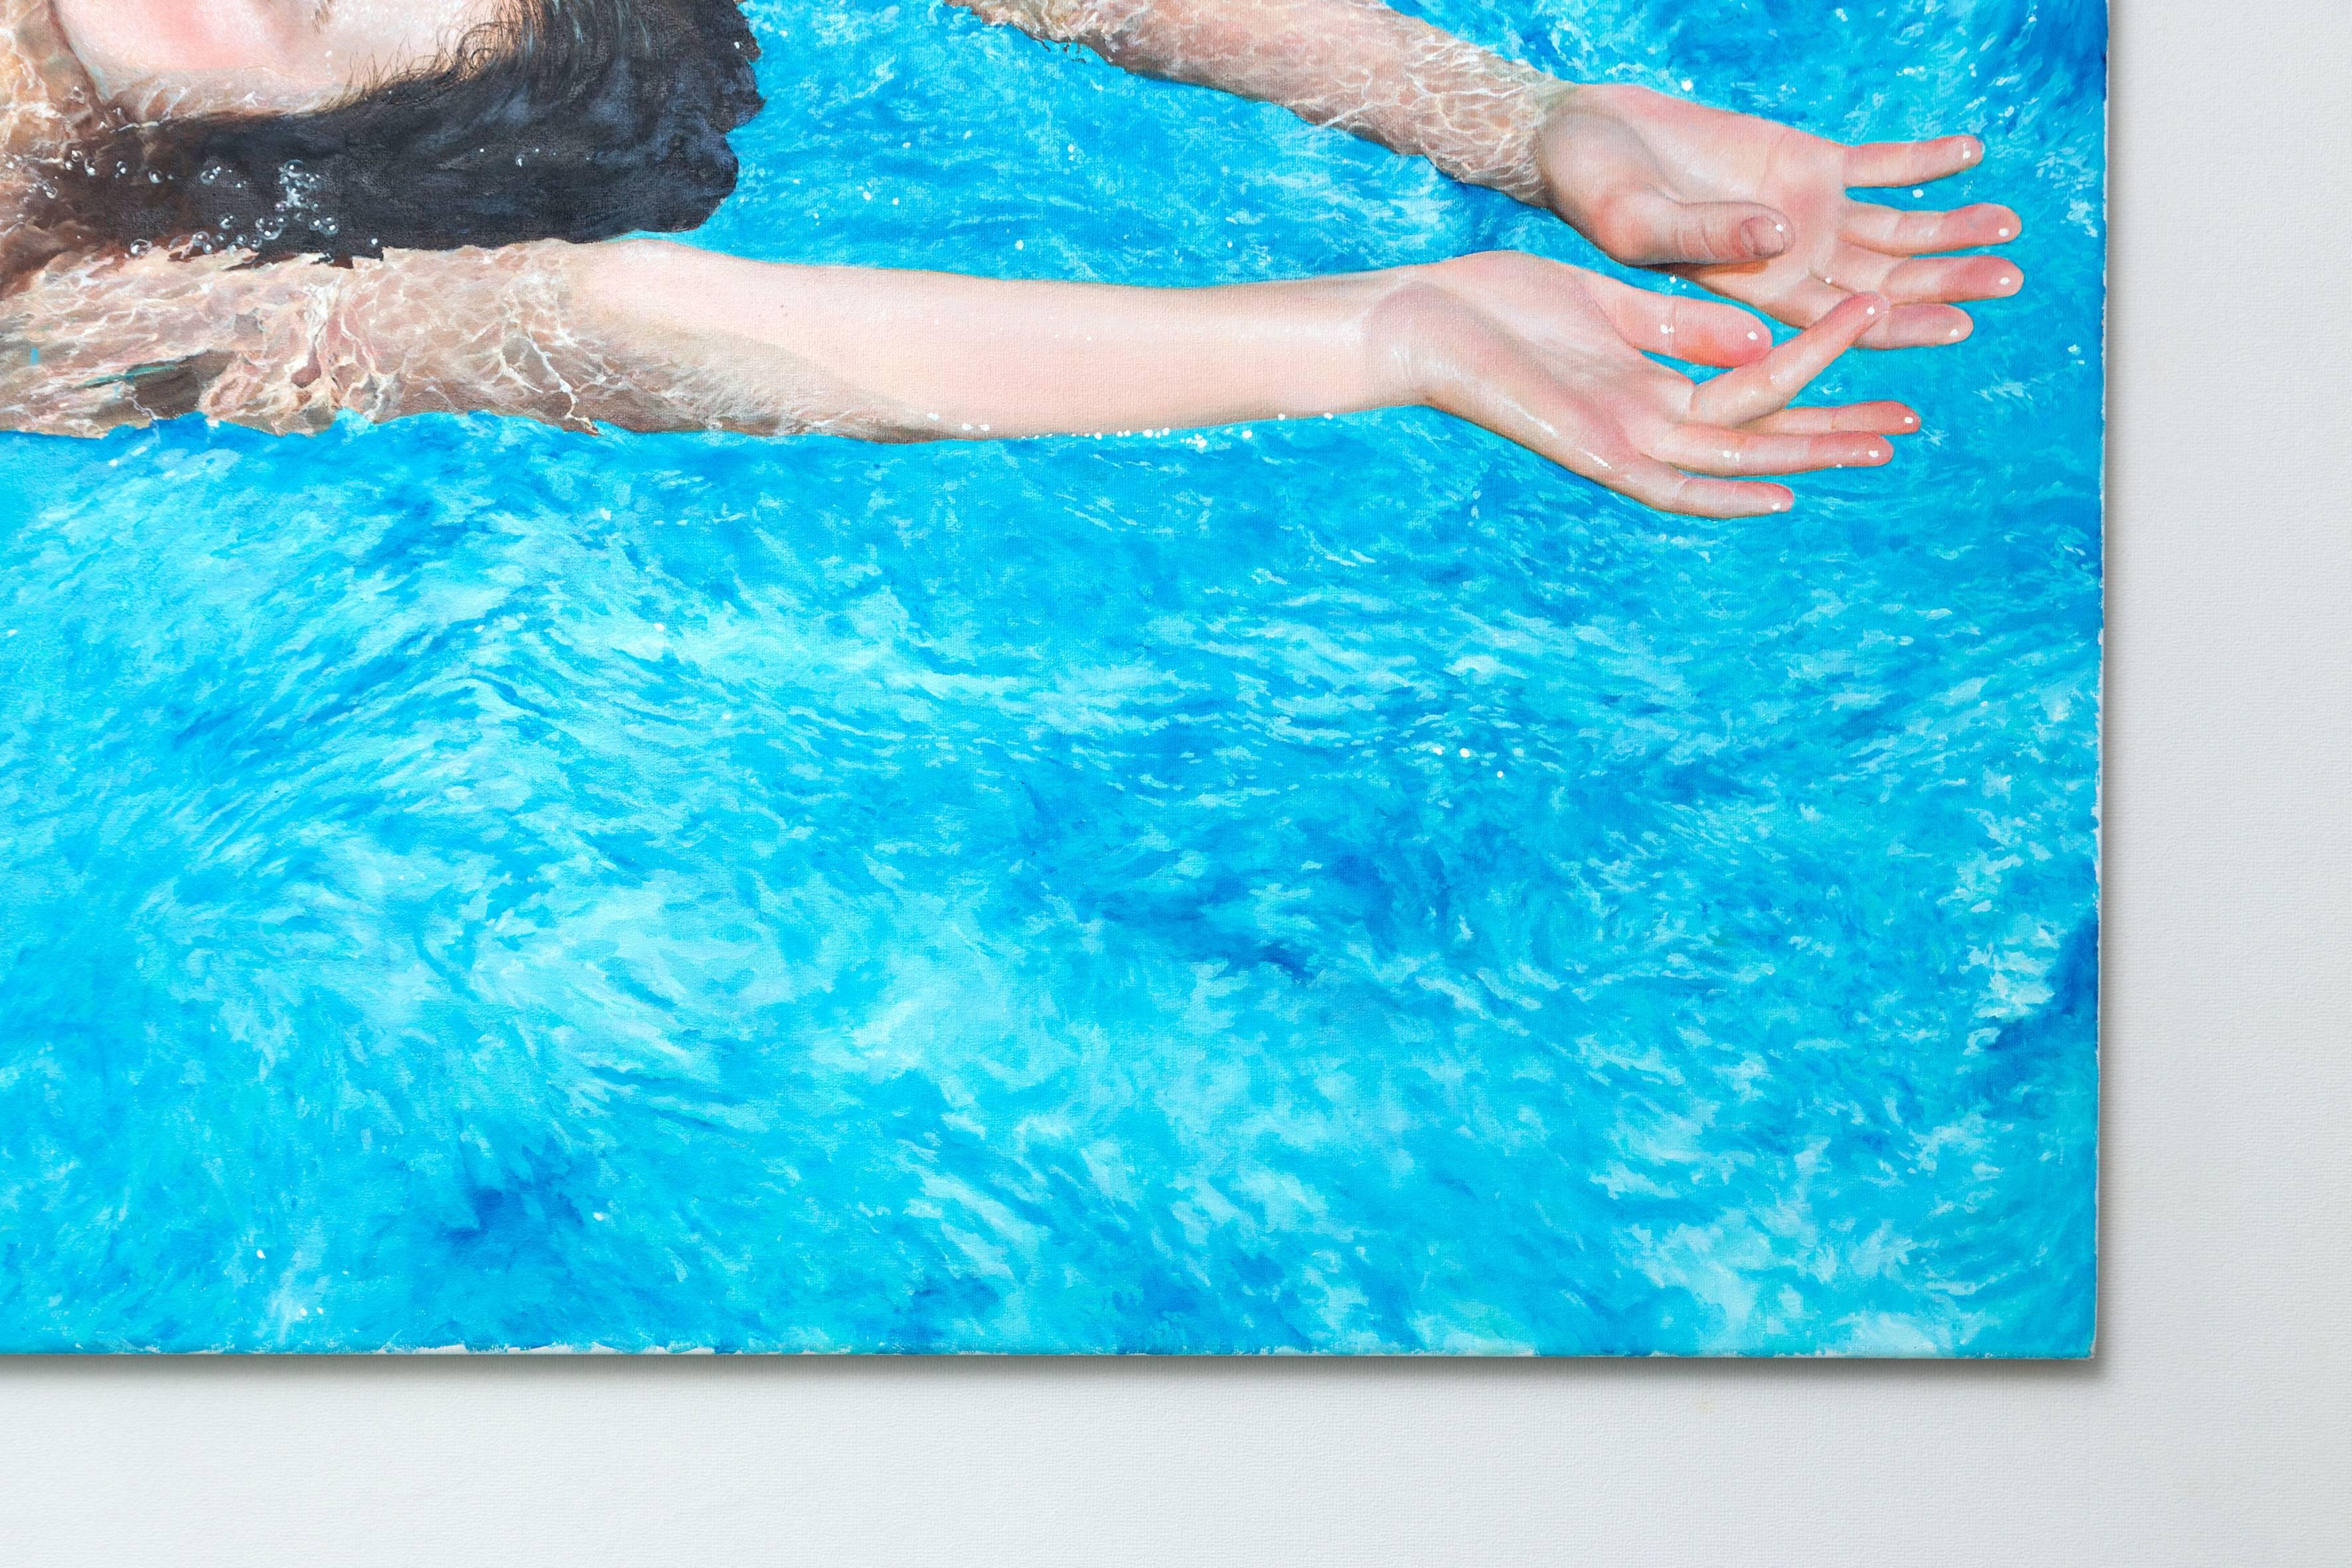 This one-of-a-kind Original comes signed and rolled up in a specialised protective tube by Sergey Piskunov:
36X47 inches
90X120 cm
_________________________________

A beauty floats across the water in a unique, floral swimsuit. Using the simple yet